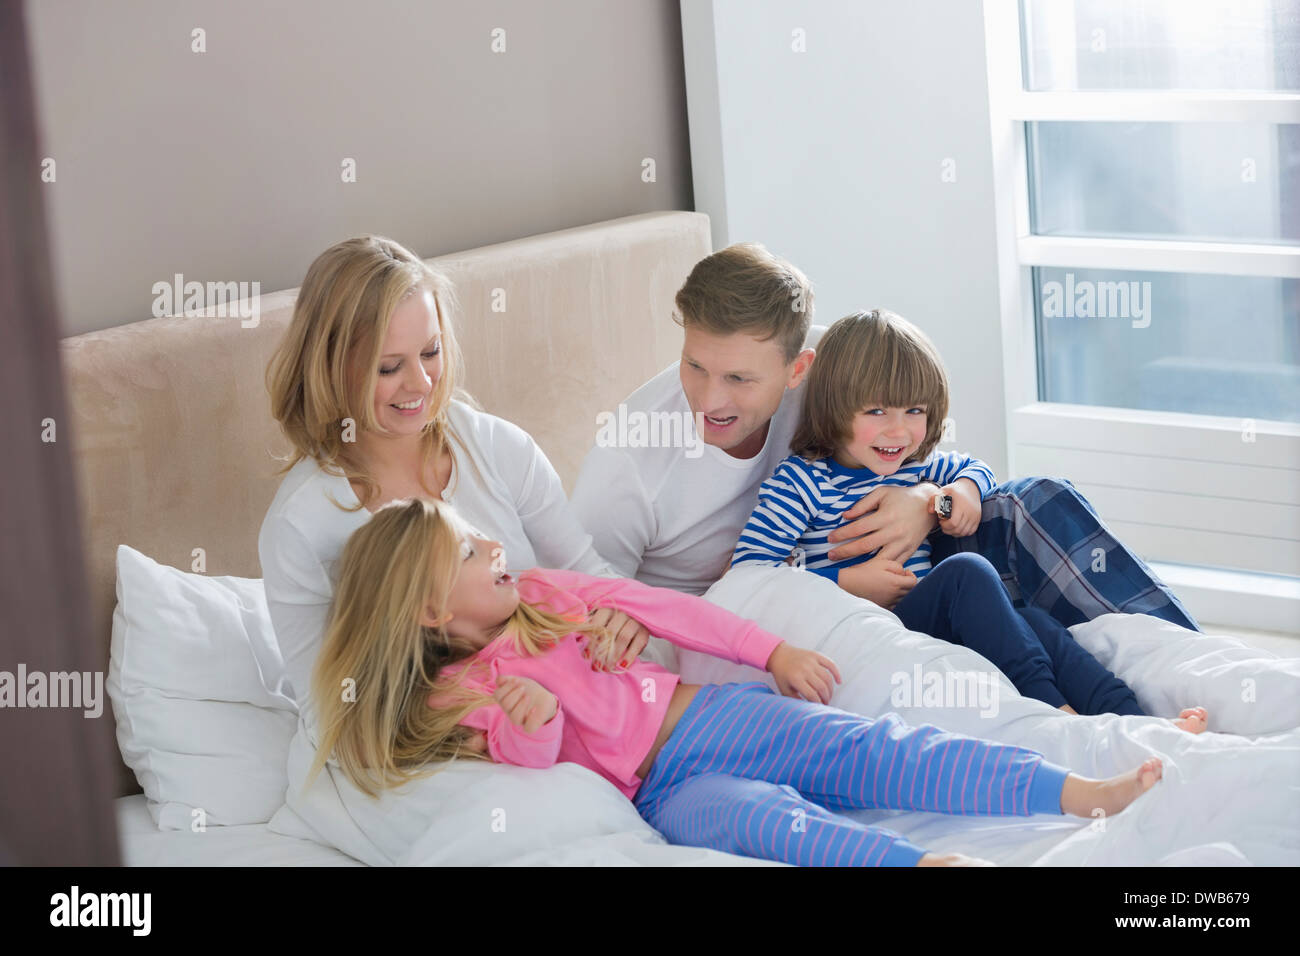 Parents playing with children in bedroom Stock Photo